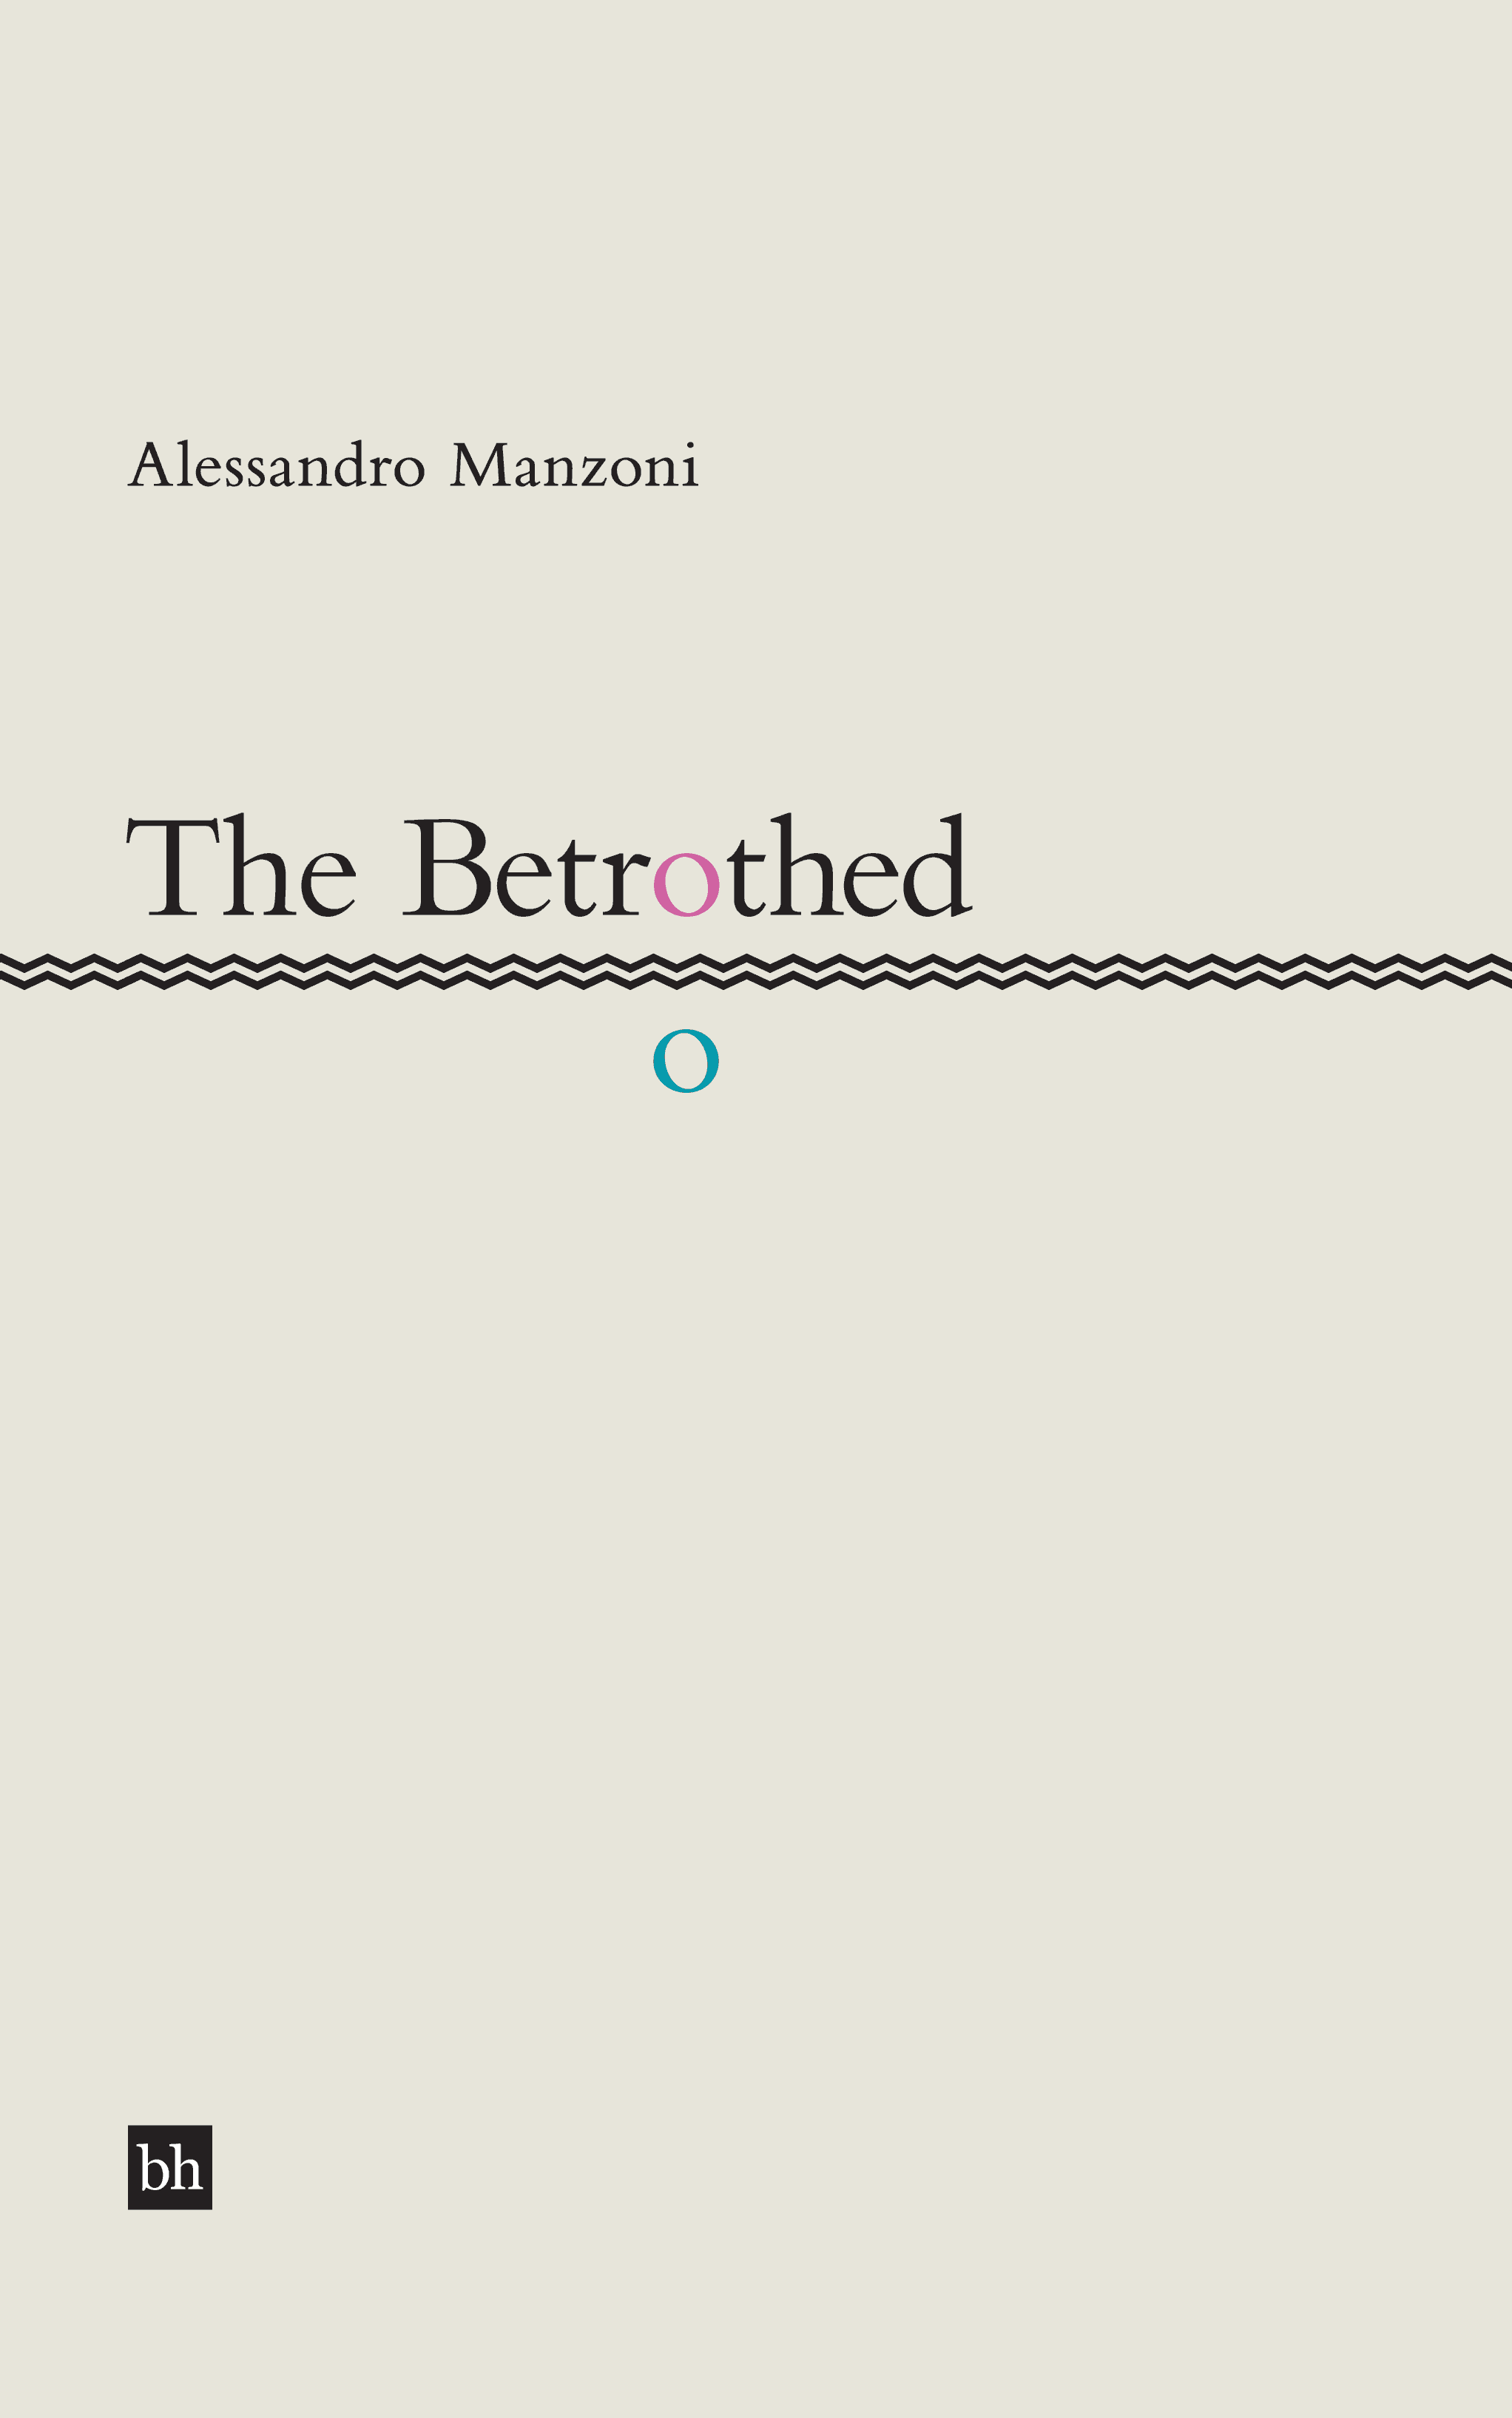 Book cover mock thumbnail for The Betrothed